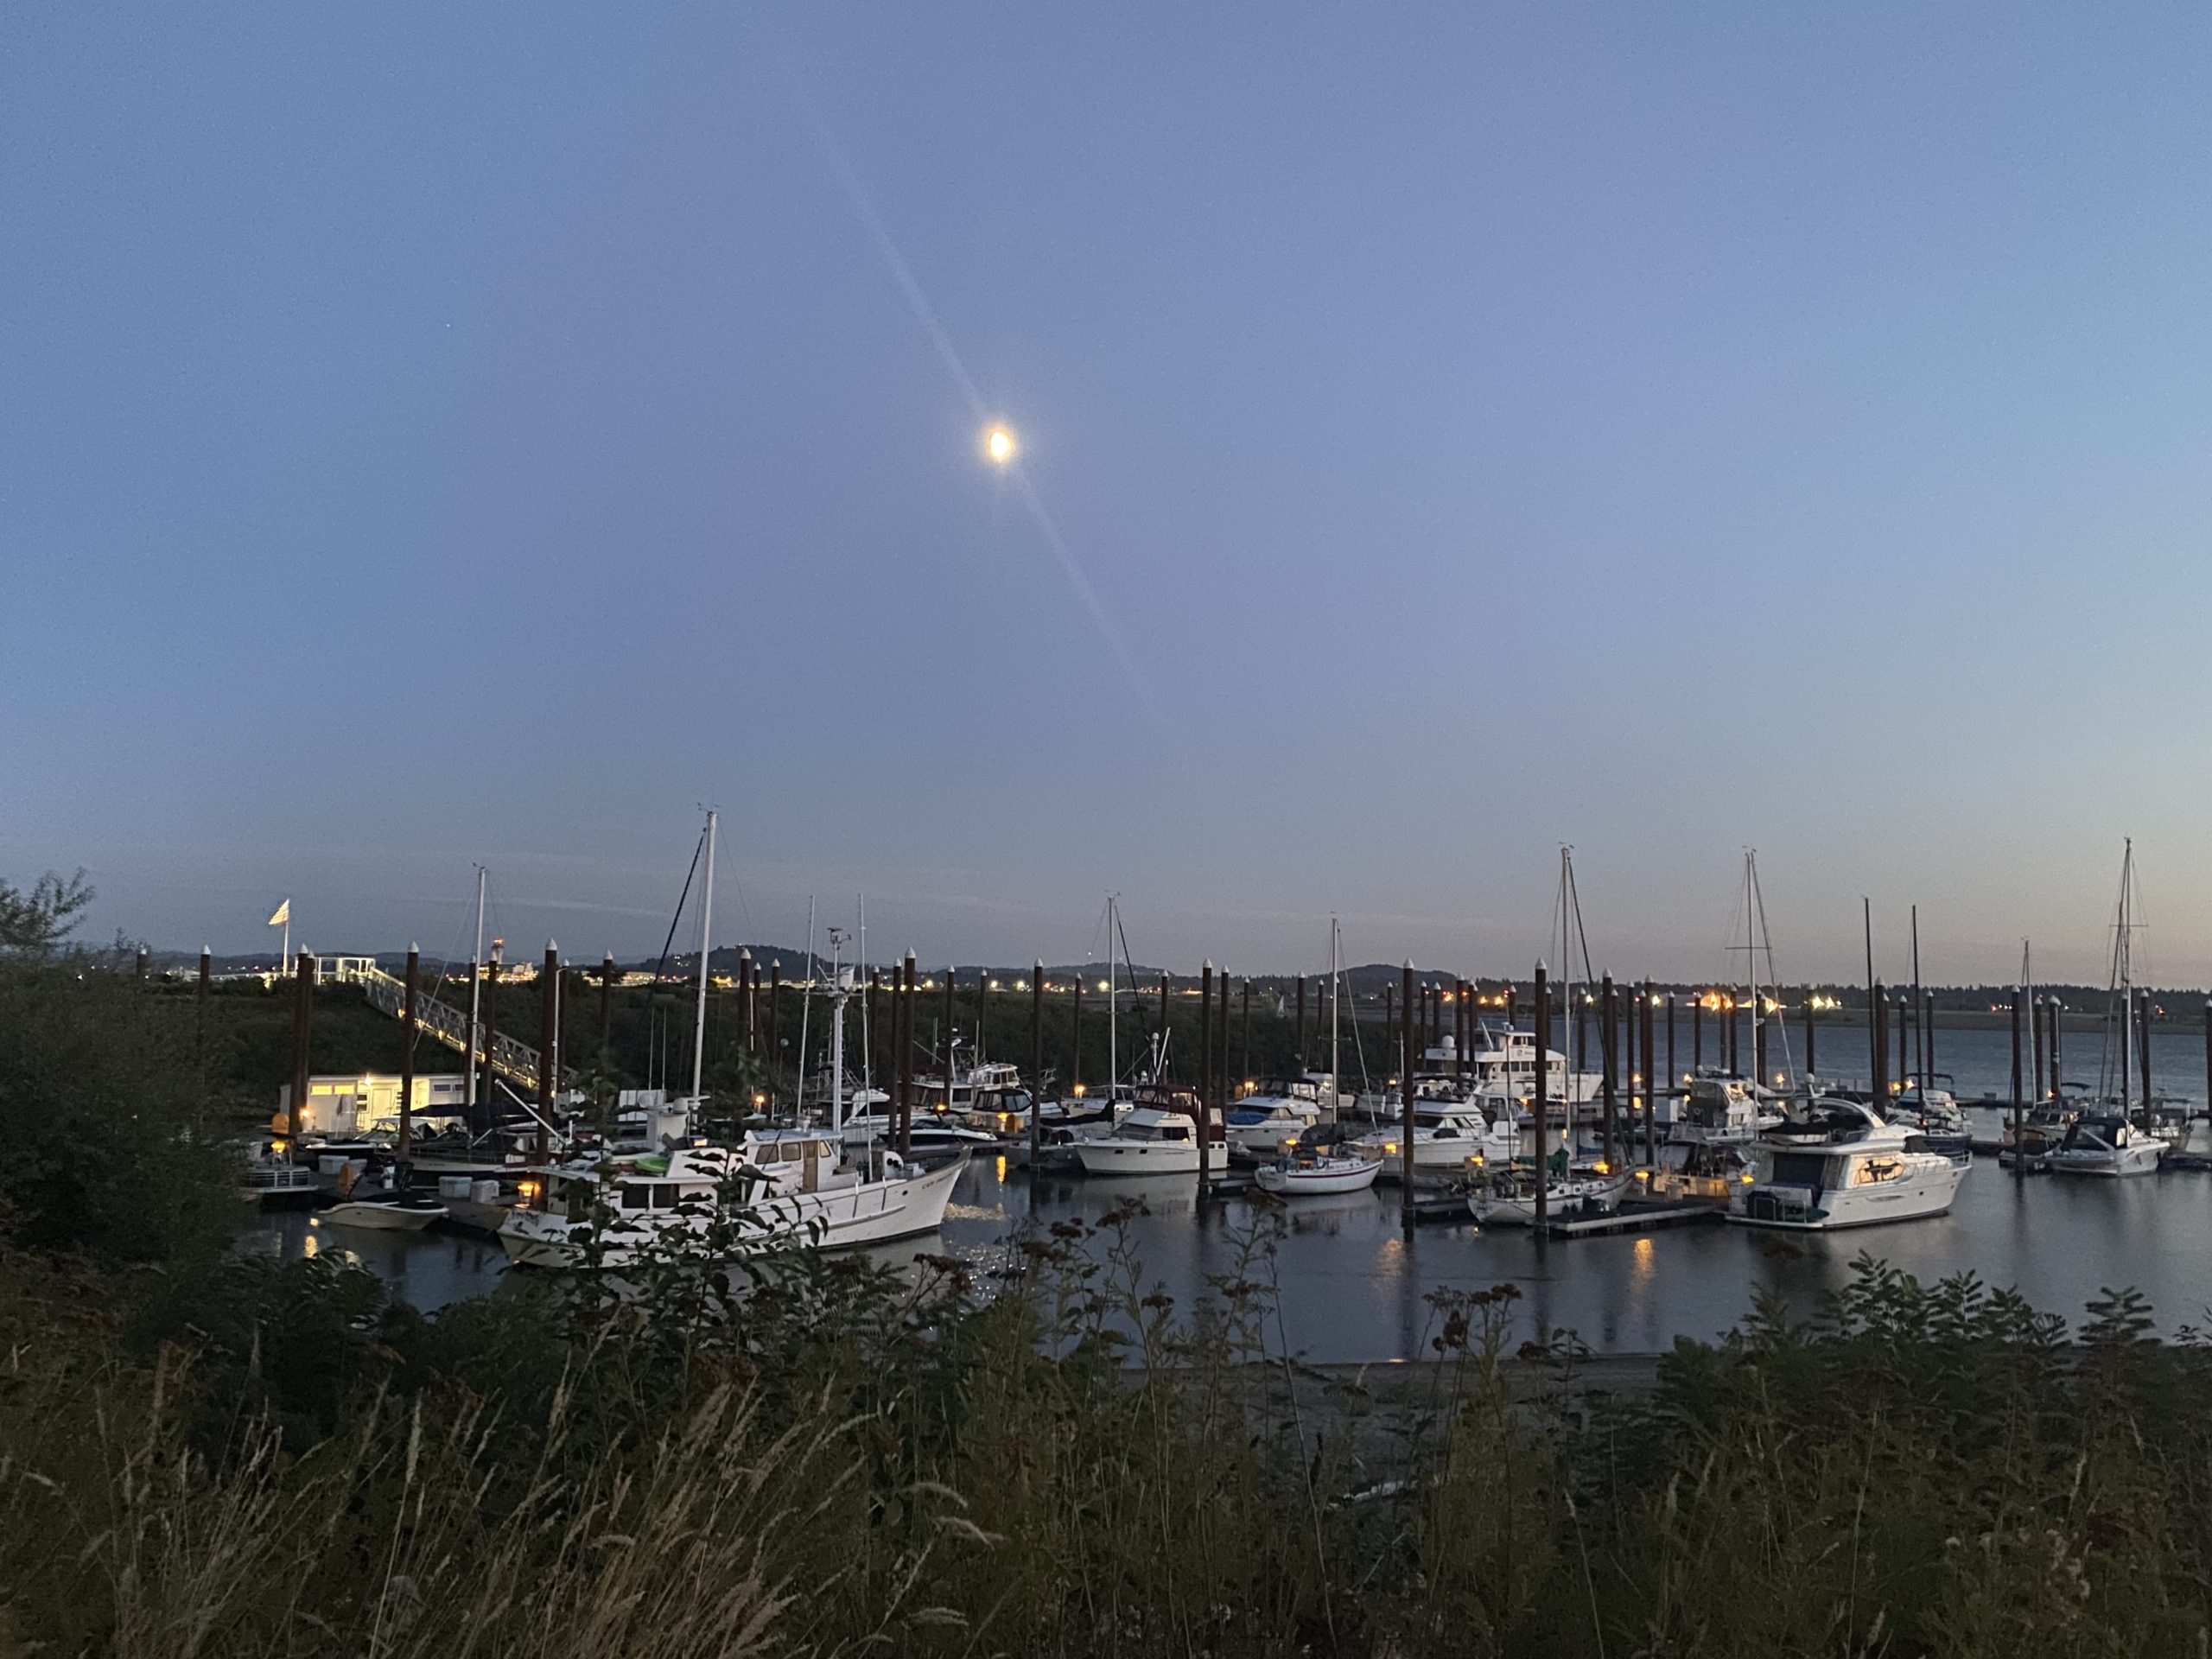 moon and boats